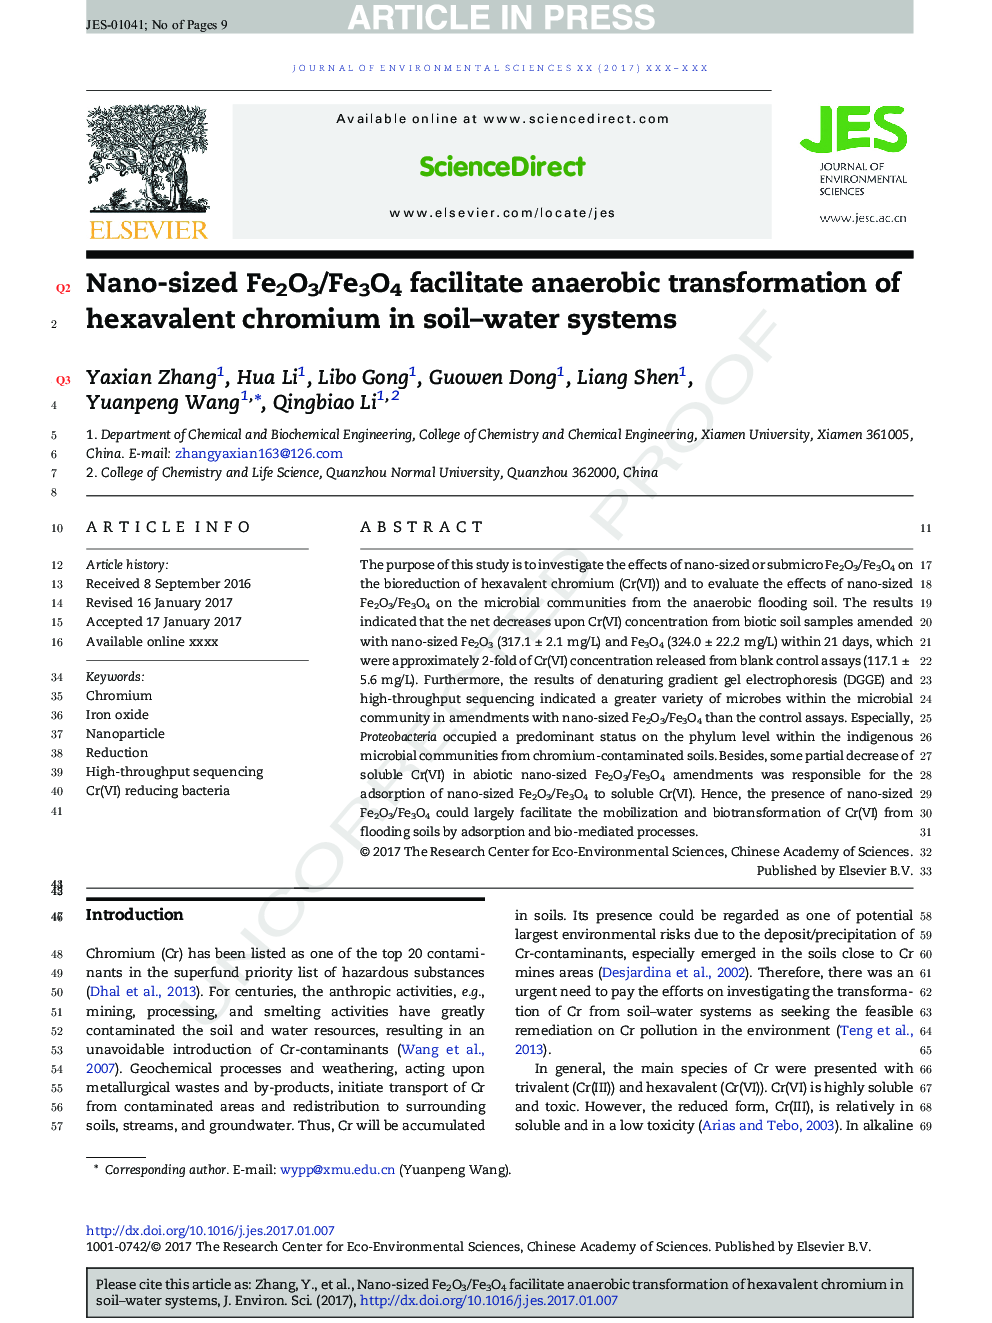 Nano-sized Fe2O3/Fe3O4 facilitate anaerobic transformation of hexavalent chromium in soil-water systems